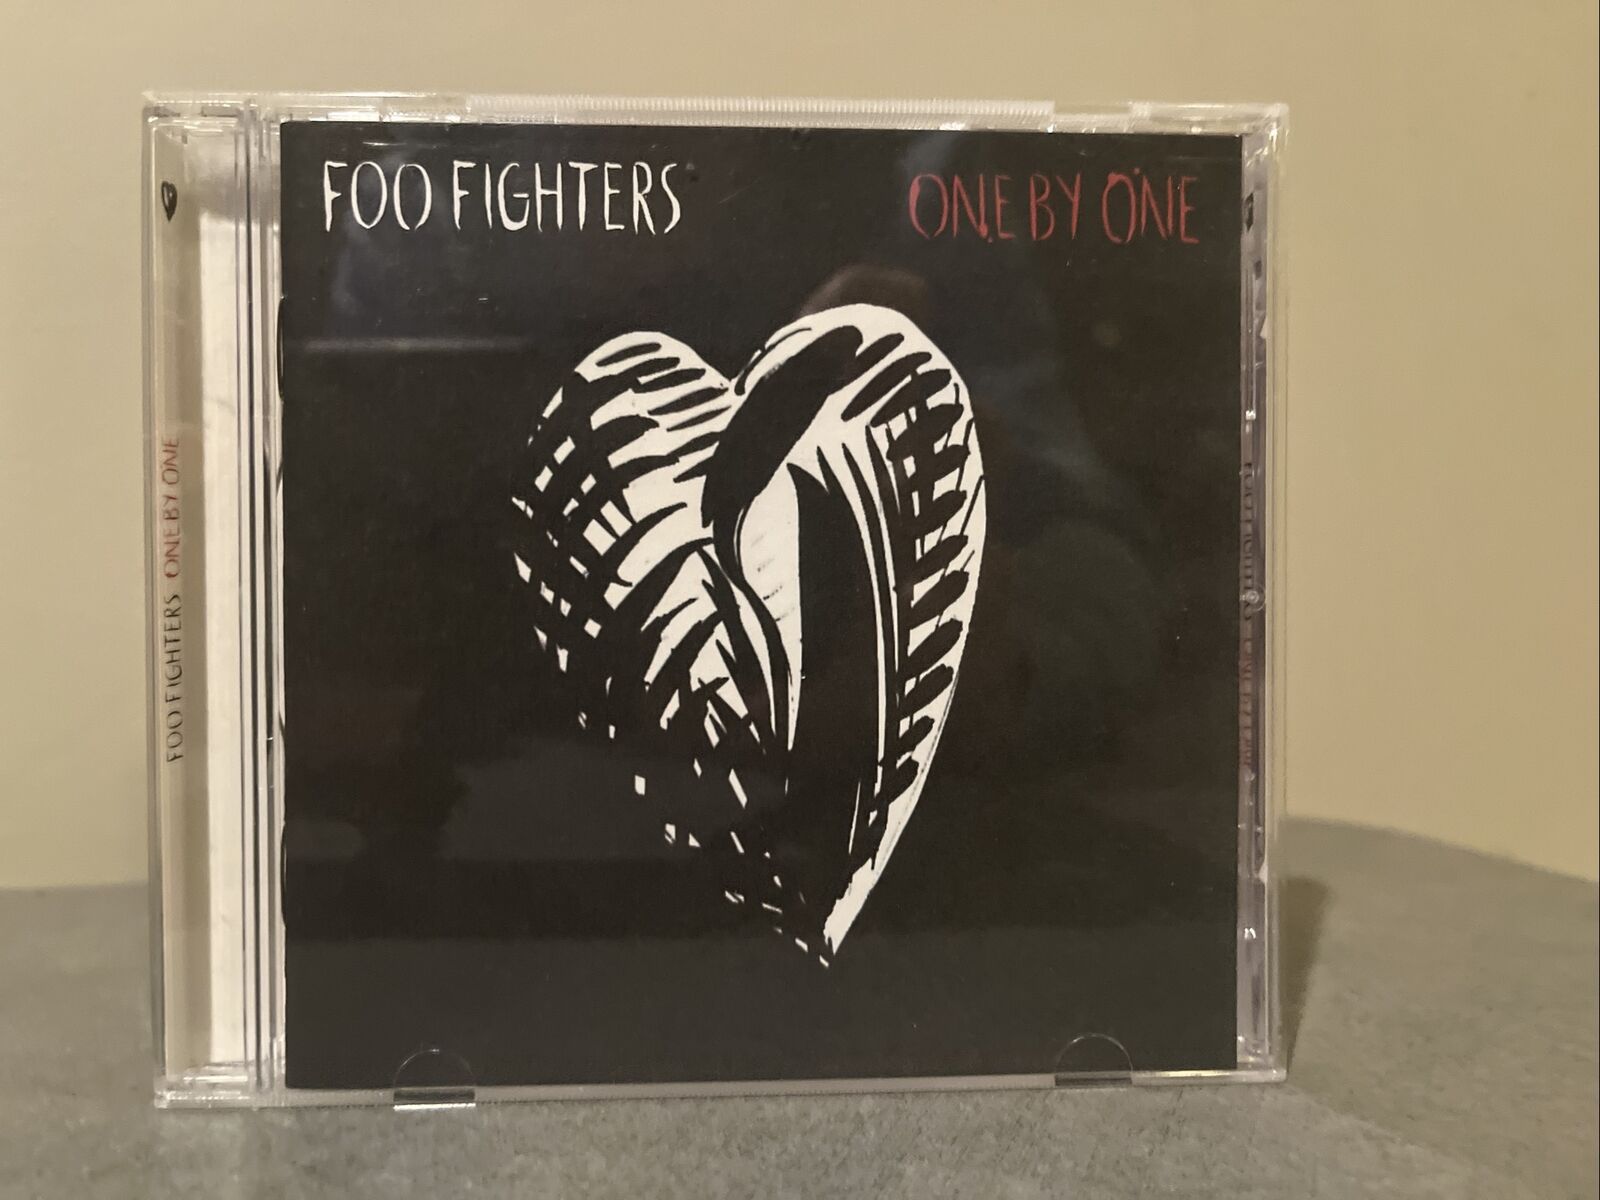 Foo Fighters - One by One CD (2002)